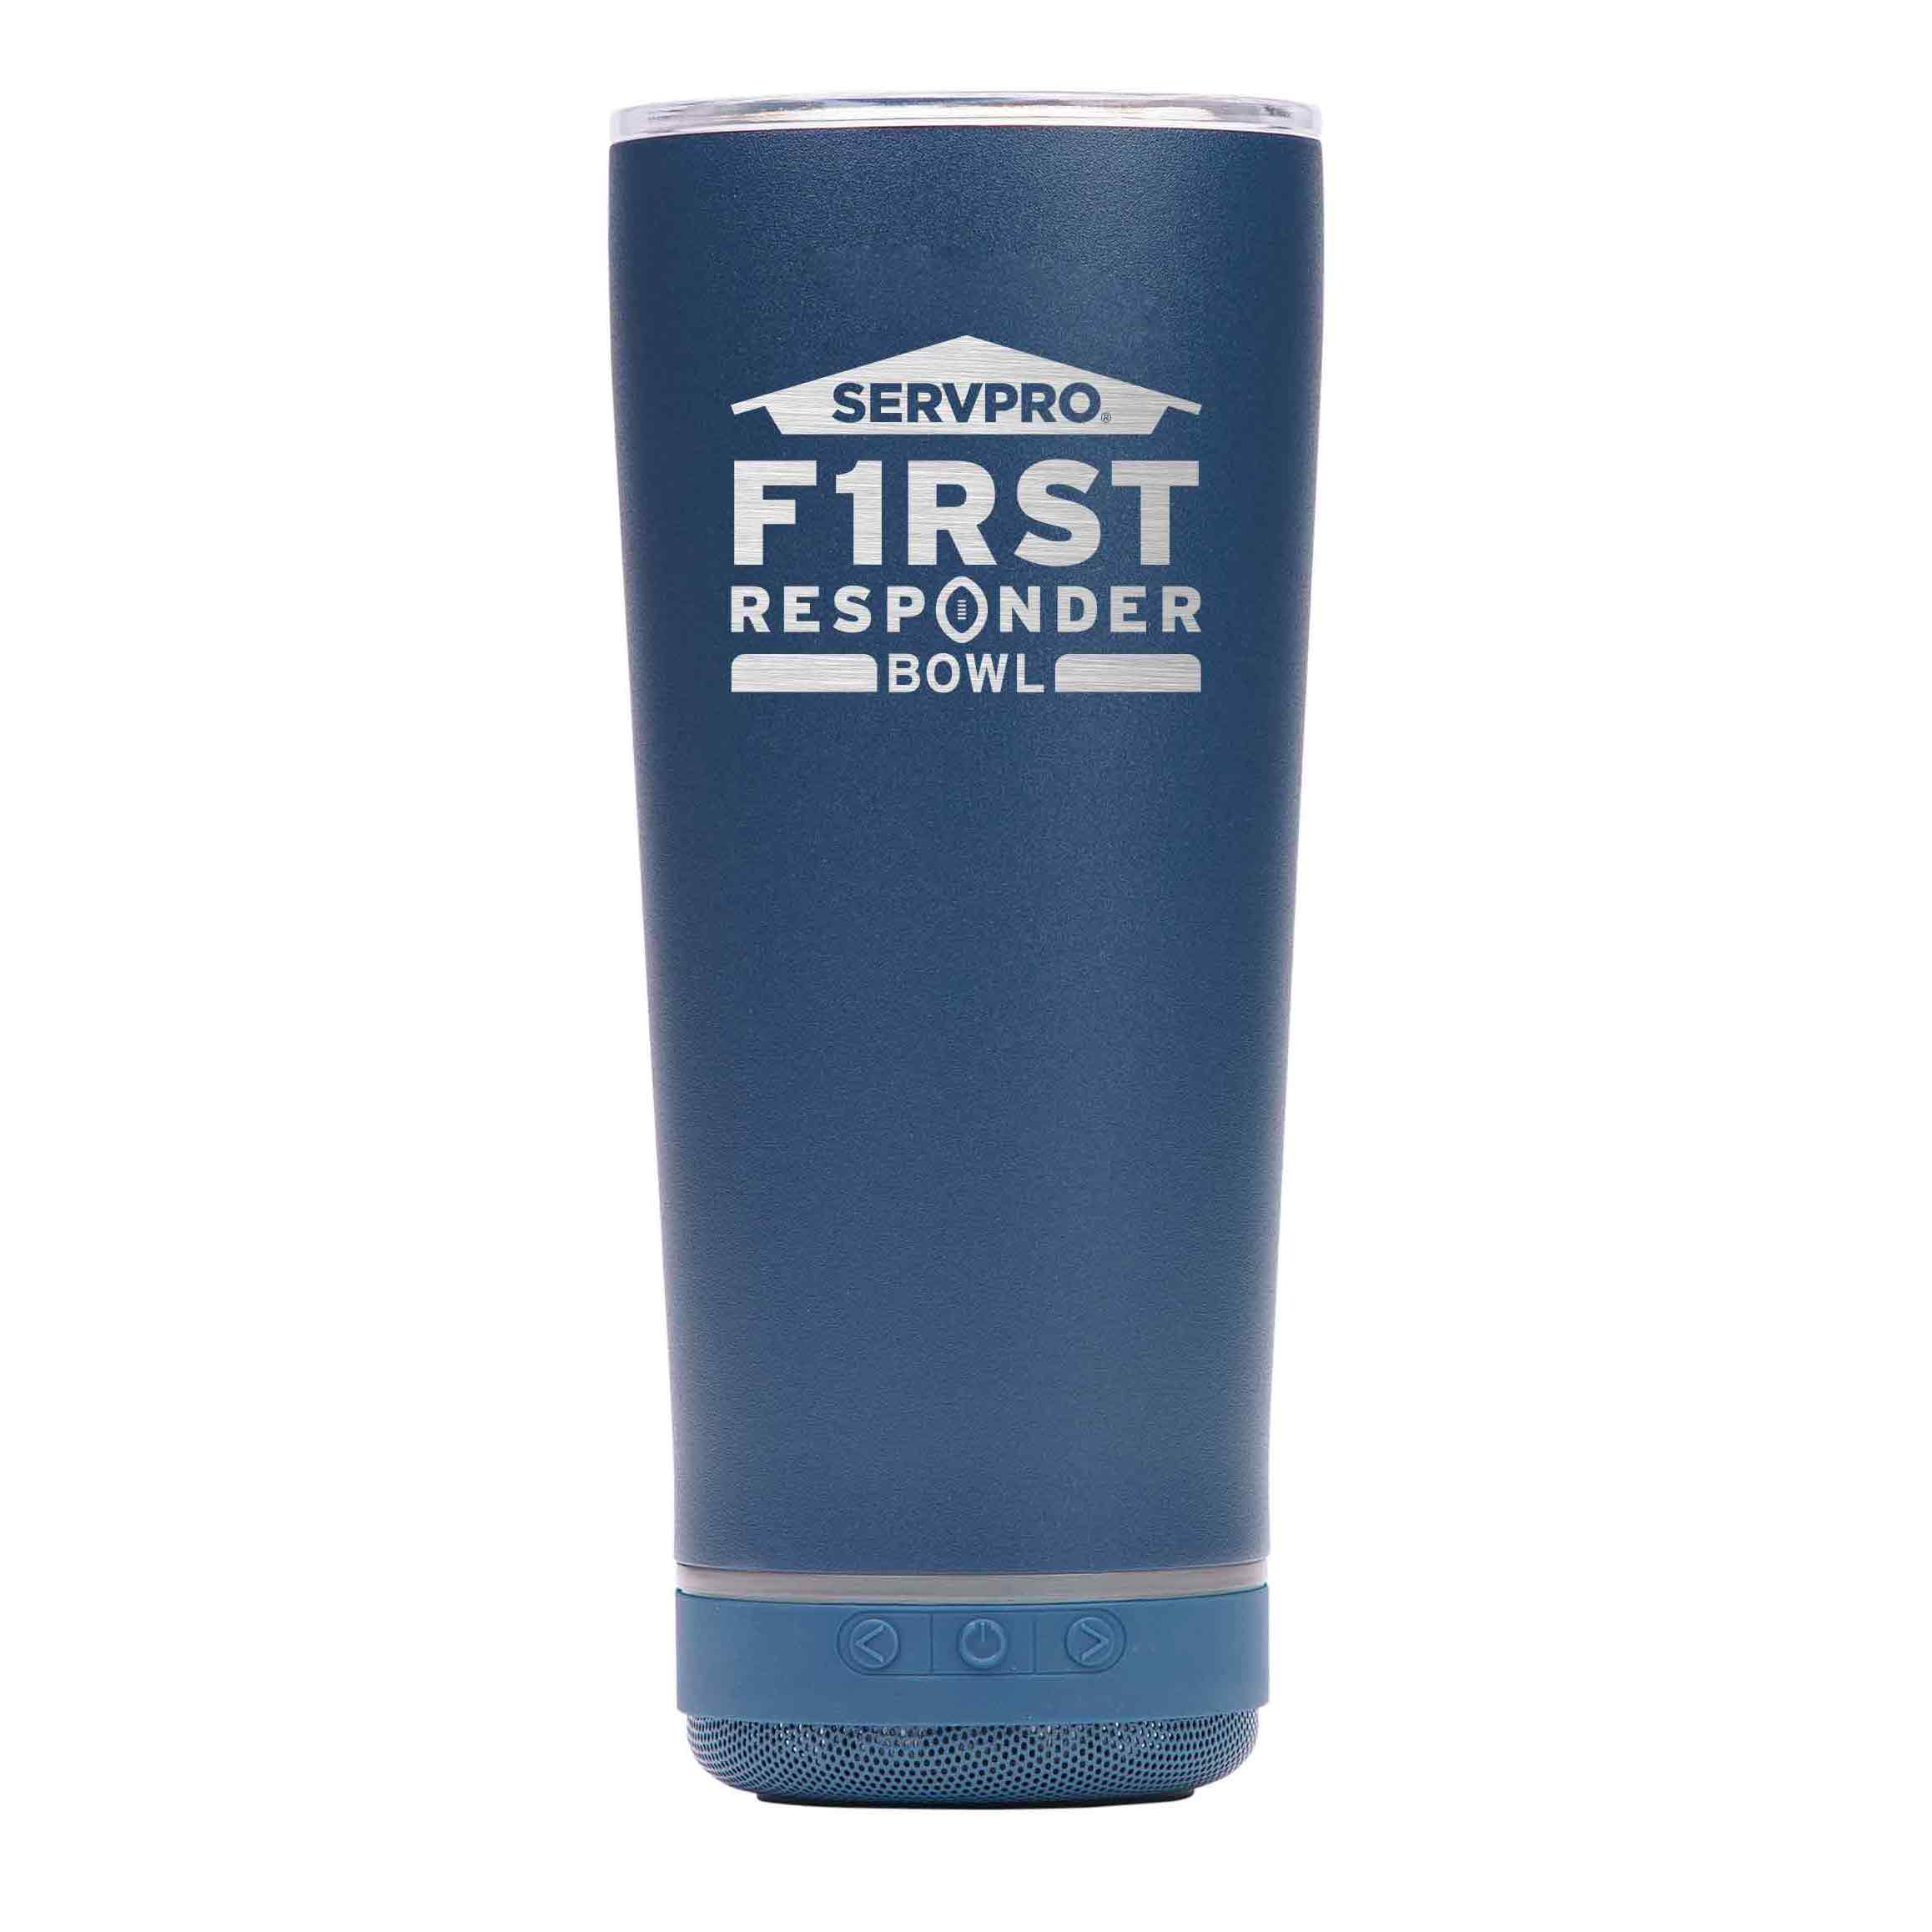 ****FIRST RESPONDER BOWL LIMITED EDITION VIBE 18oz TUMBLER WITH BLUETOOTH SPEAKER!!!****